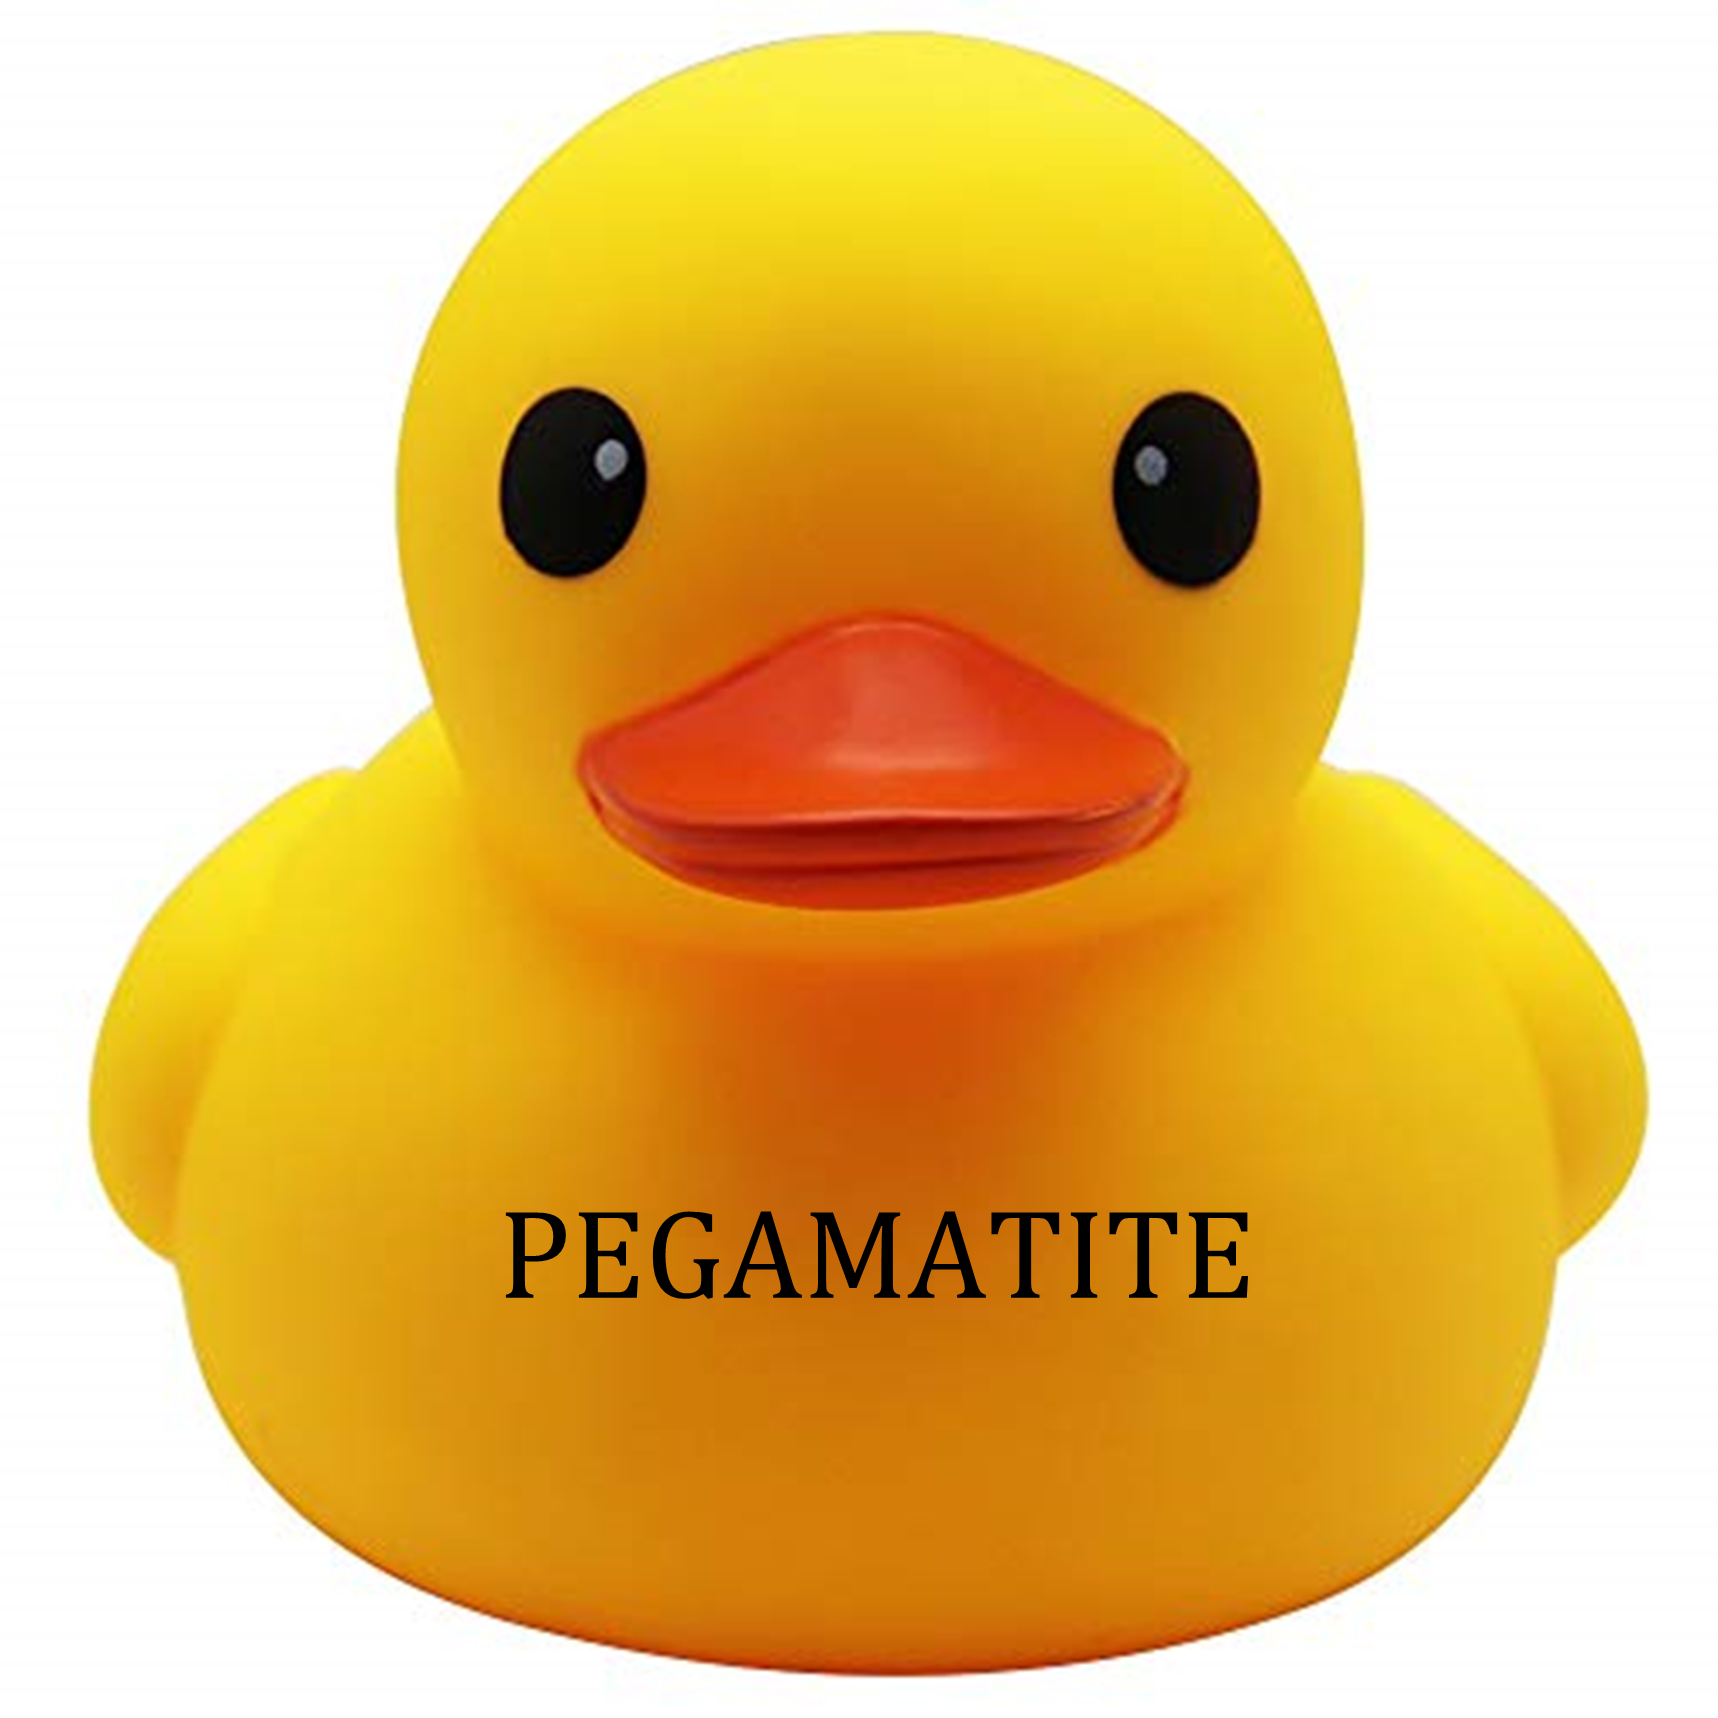 Remember to check your pegmatite dyke for impure nasties like iron, or mica, or bogus ducks.